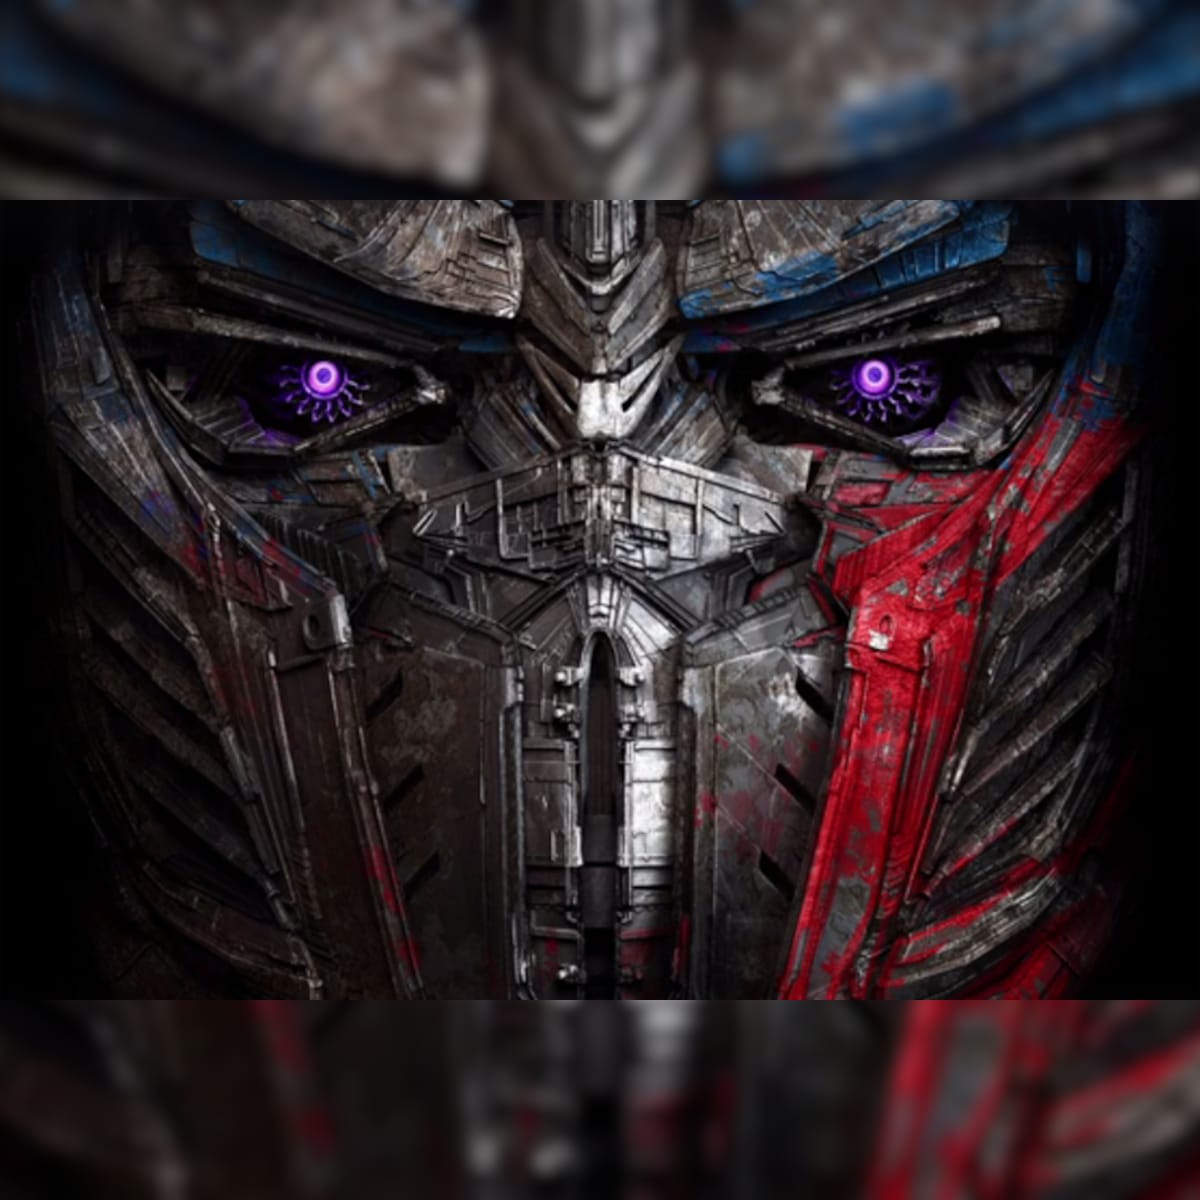 Fifth of 'Transformers' Titled 'The Last Knight'